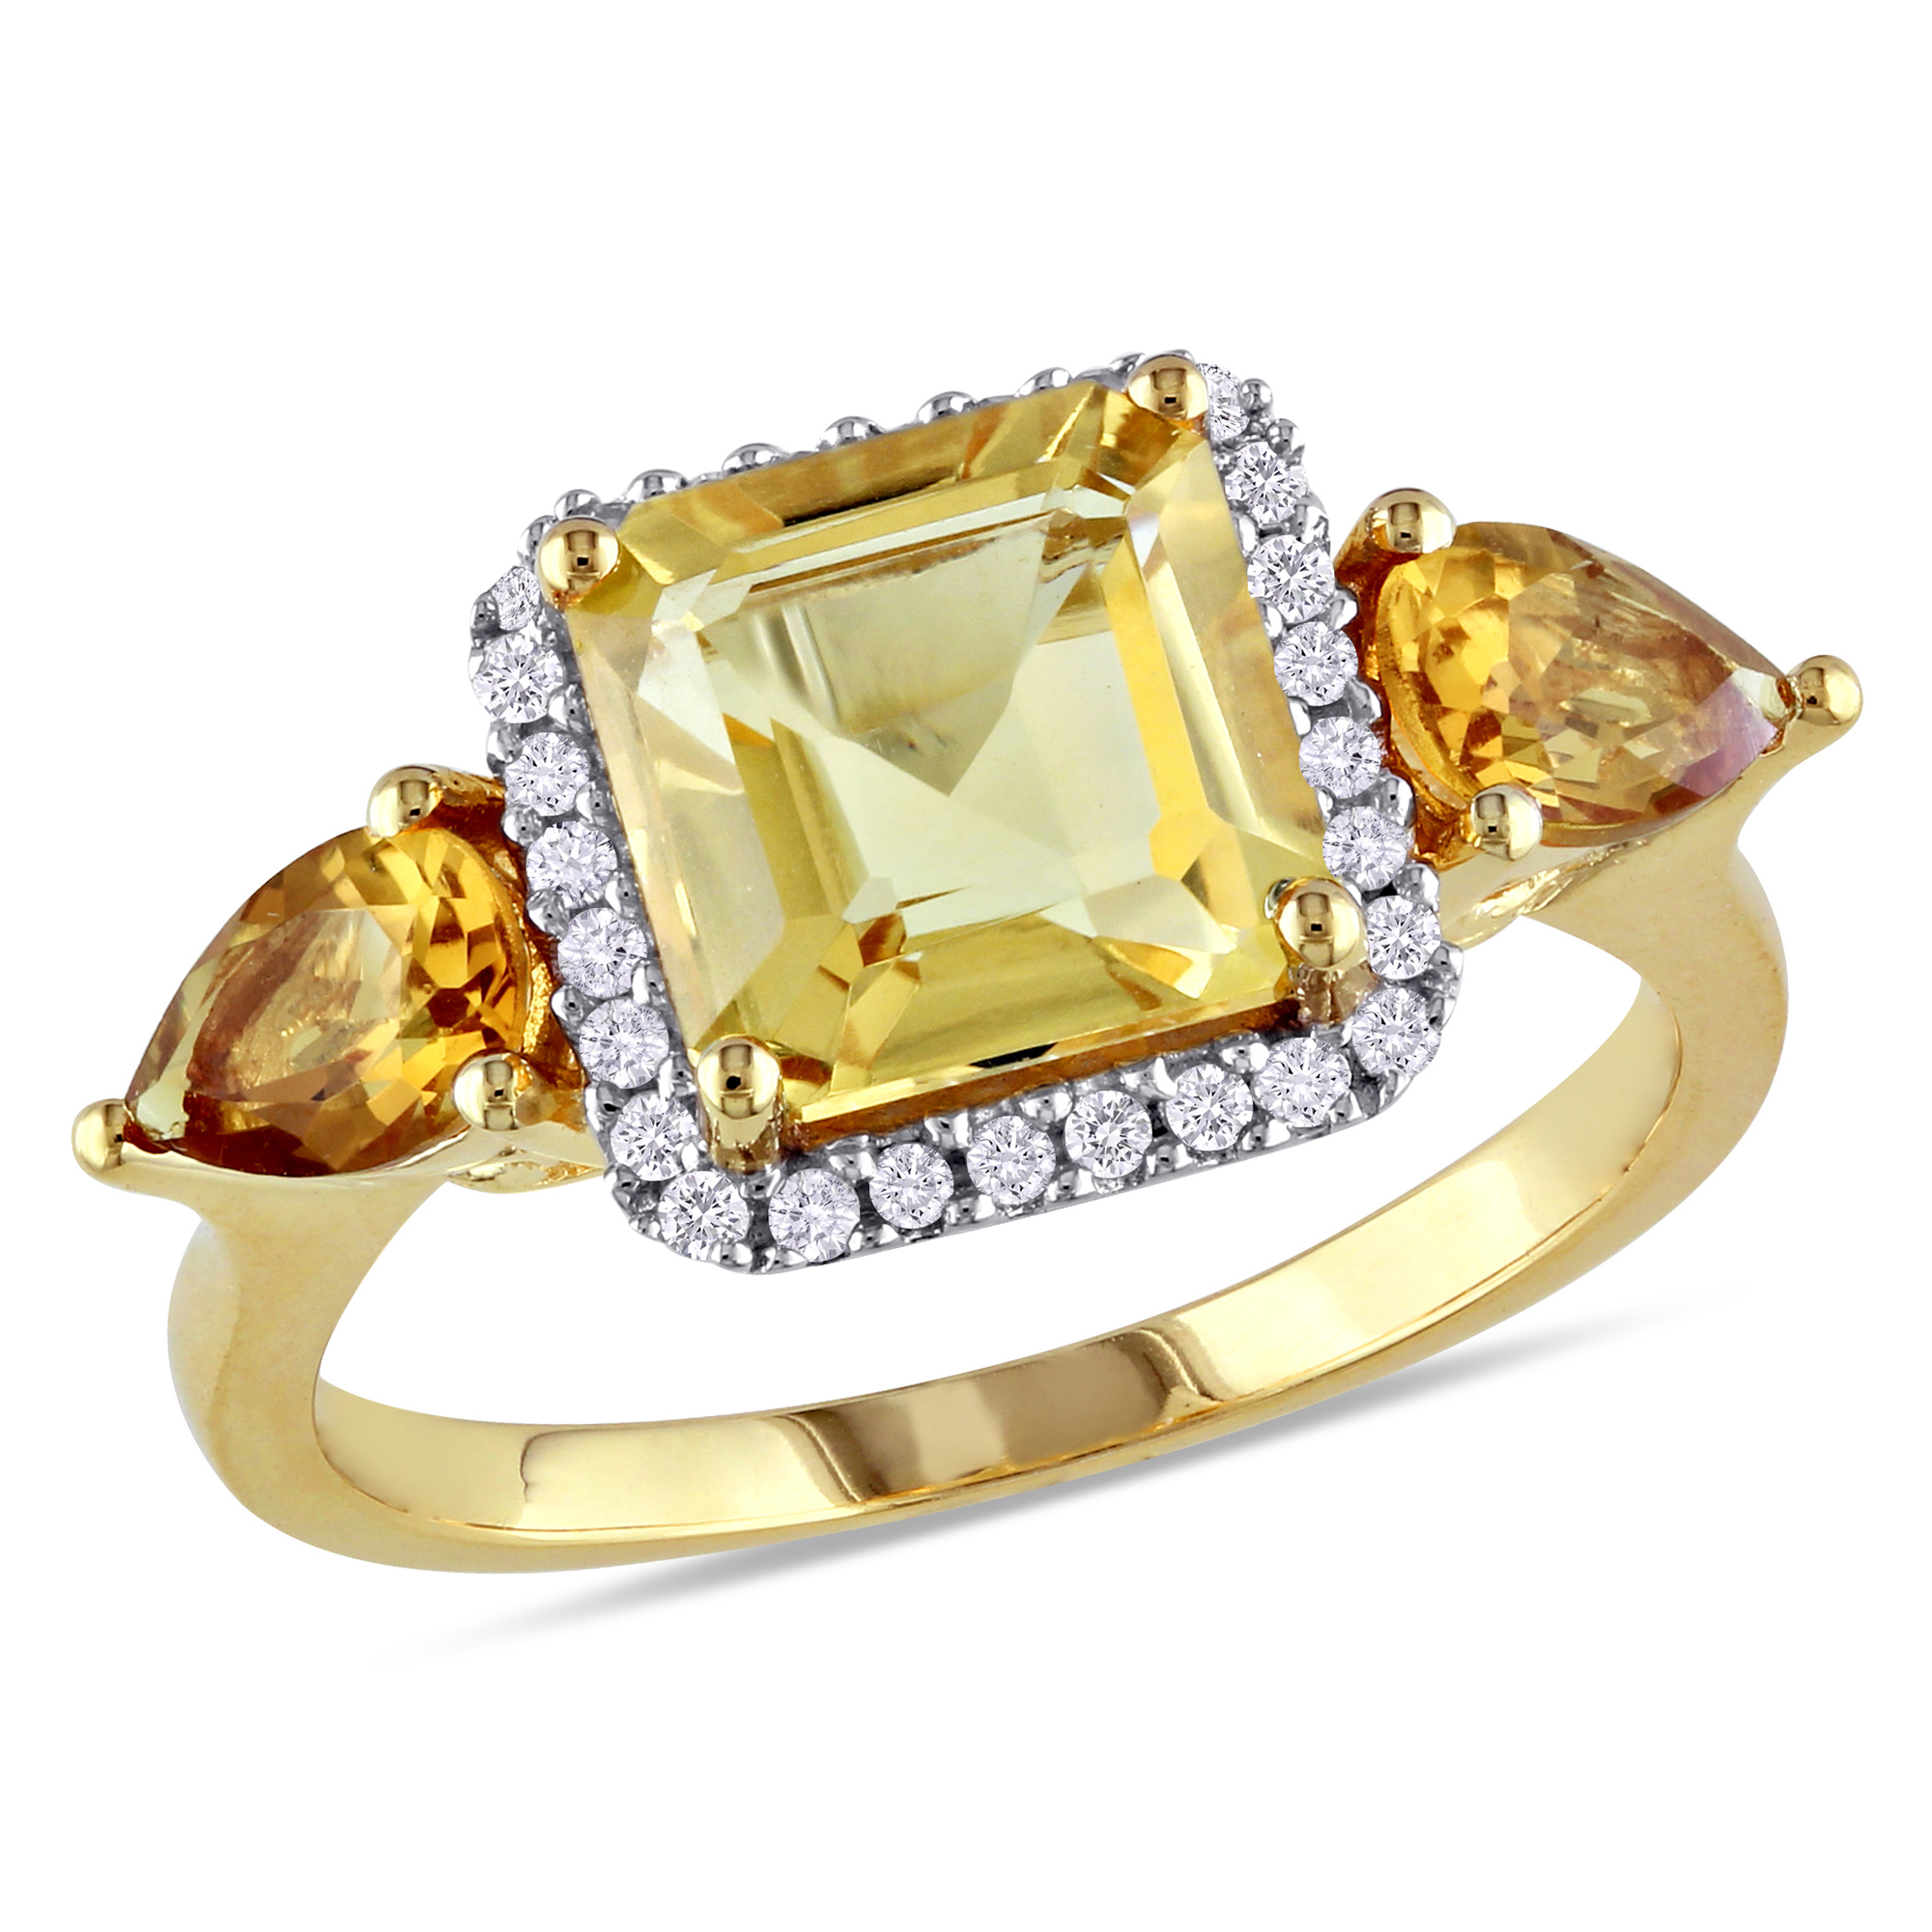 Amour 1/7 Carat T.W. Diamond and 3 Carat T.G.W. Citrine Madeira Citrine Fashion Ring in Gold Plated Sterling Silver GH I2;I3